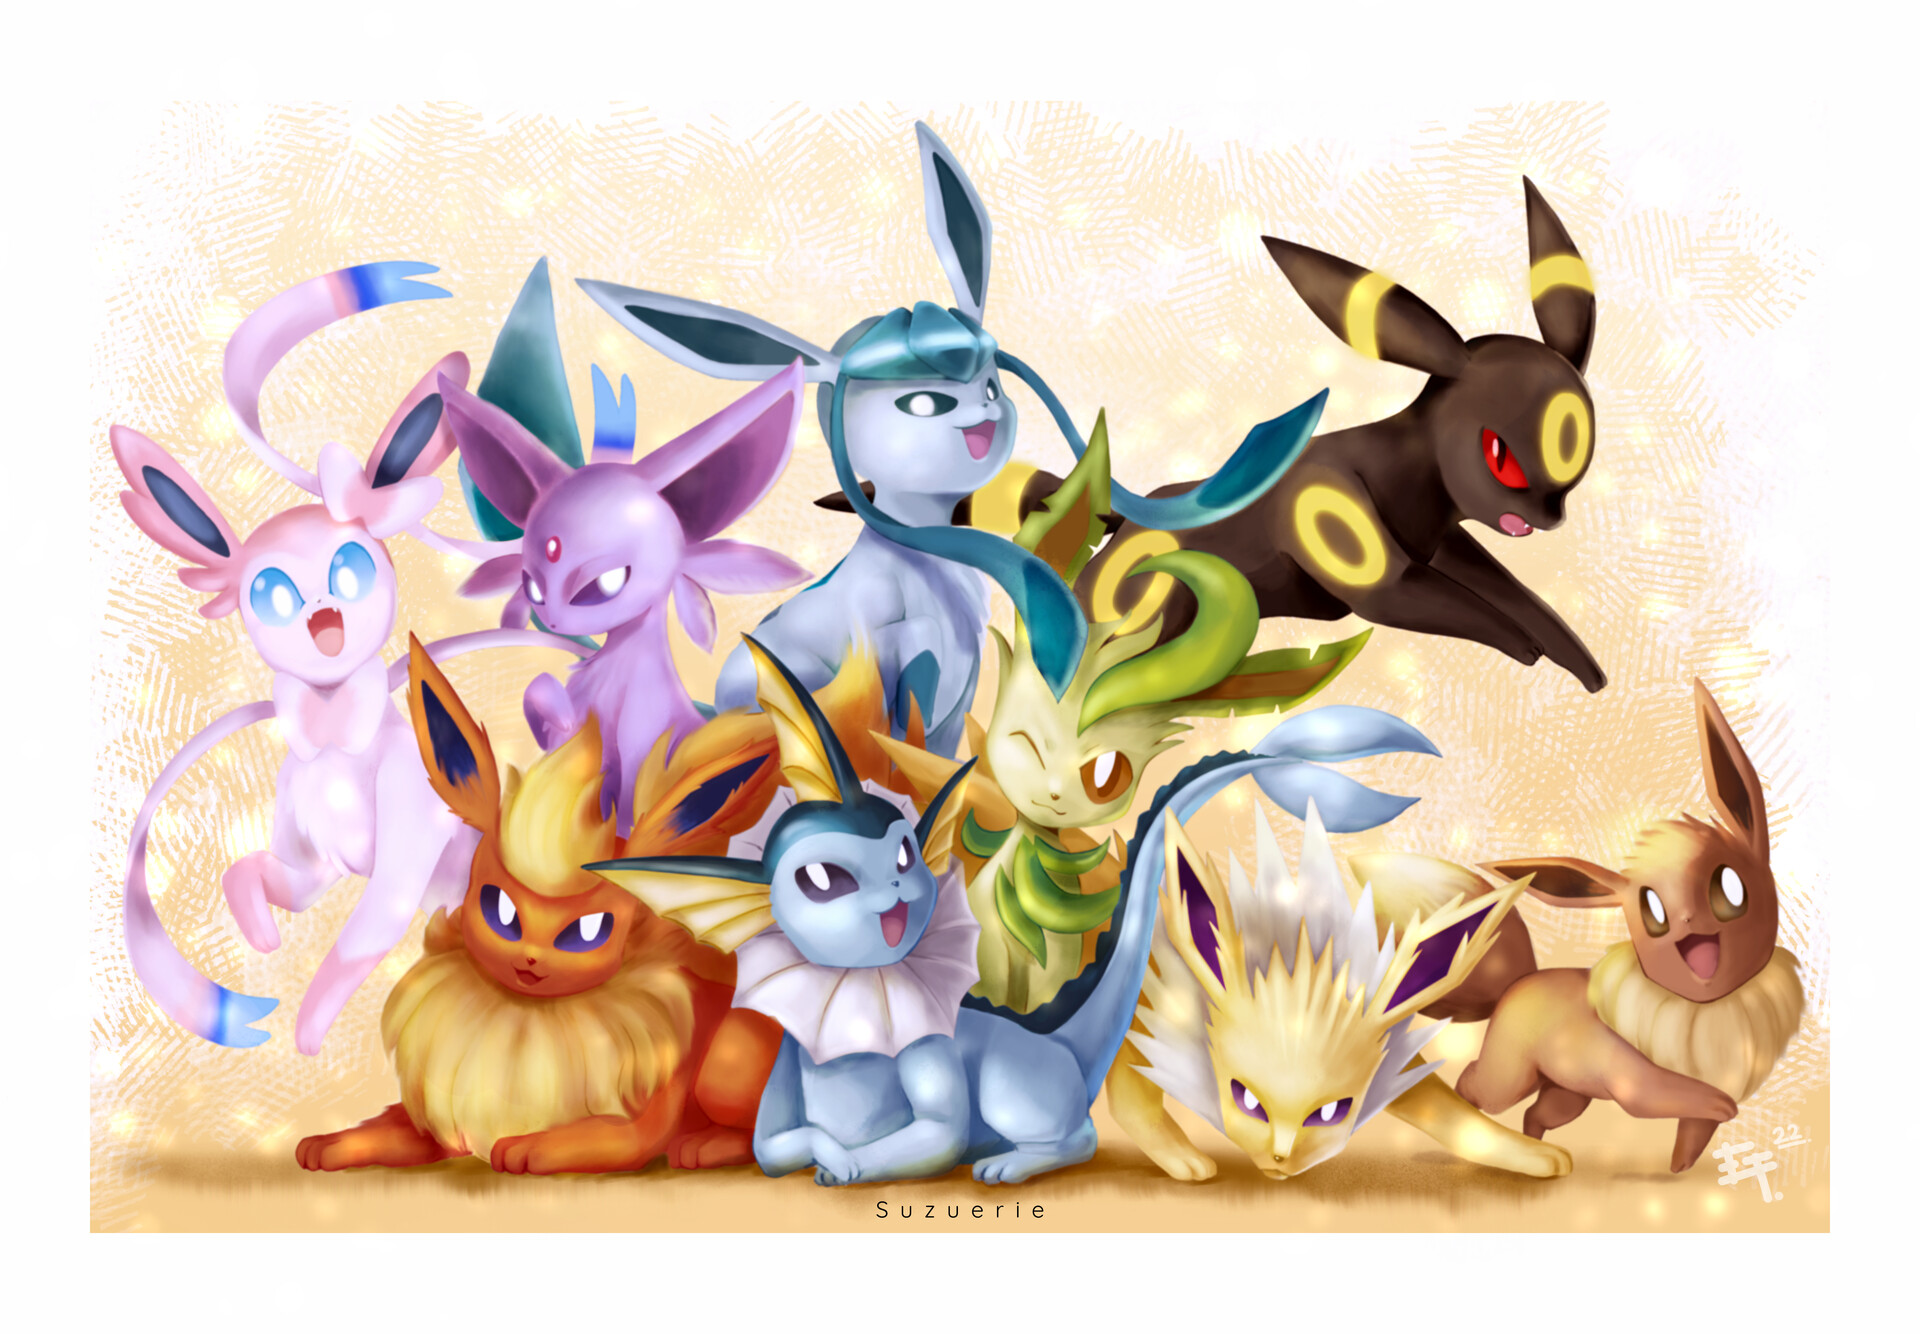 Grupo Erik Pokemon Eevee Evolutions Poster - 35.8 x 24.2 inches / 91 x 61.5  cm - Shipped Rolled Up - Pokemon Poster - Cool Posters - Art Poster 